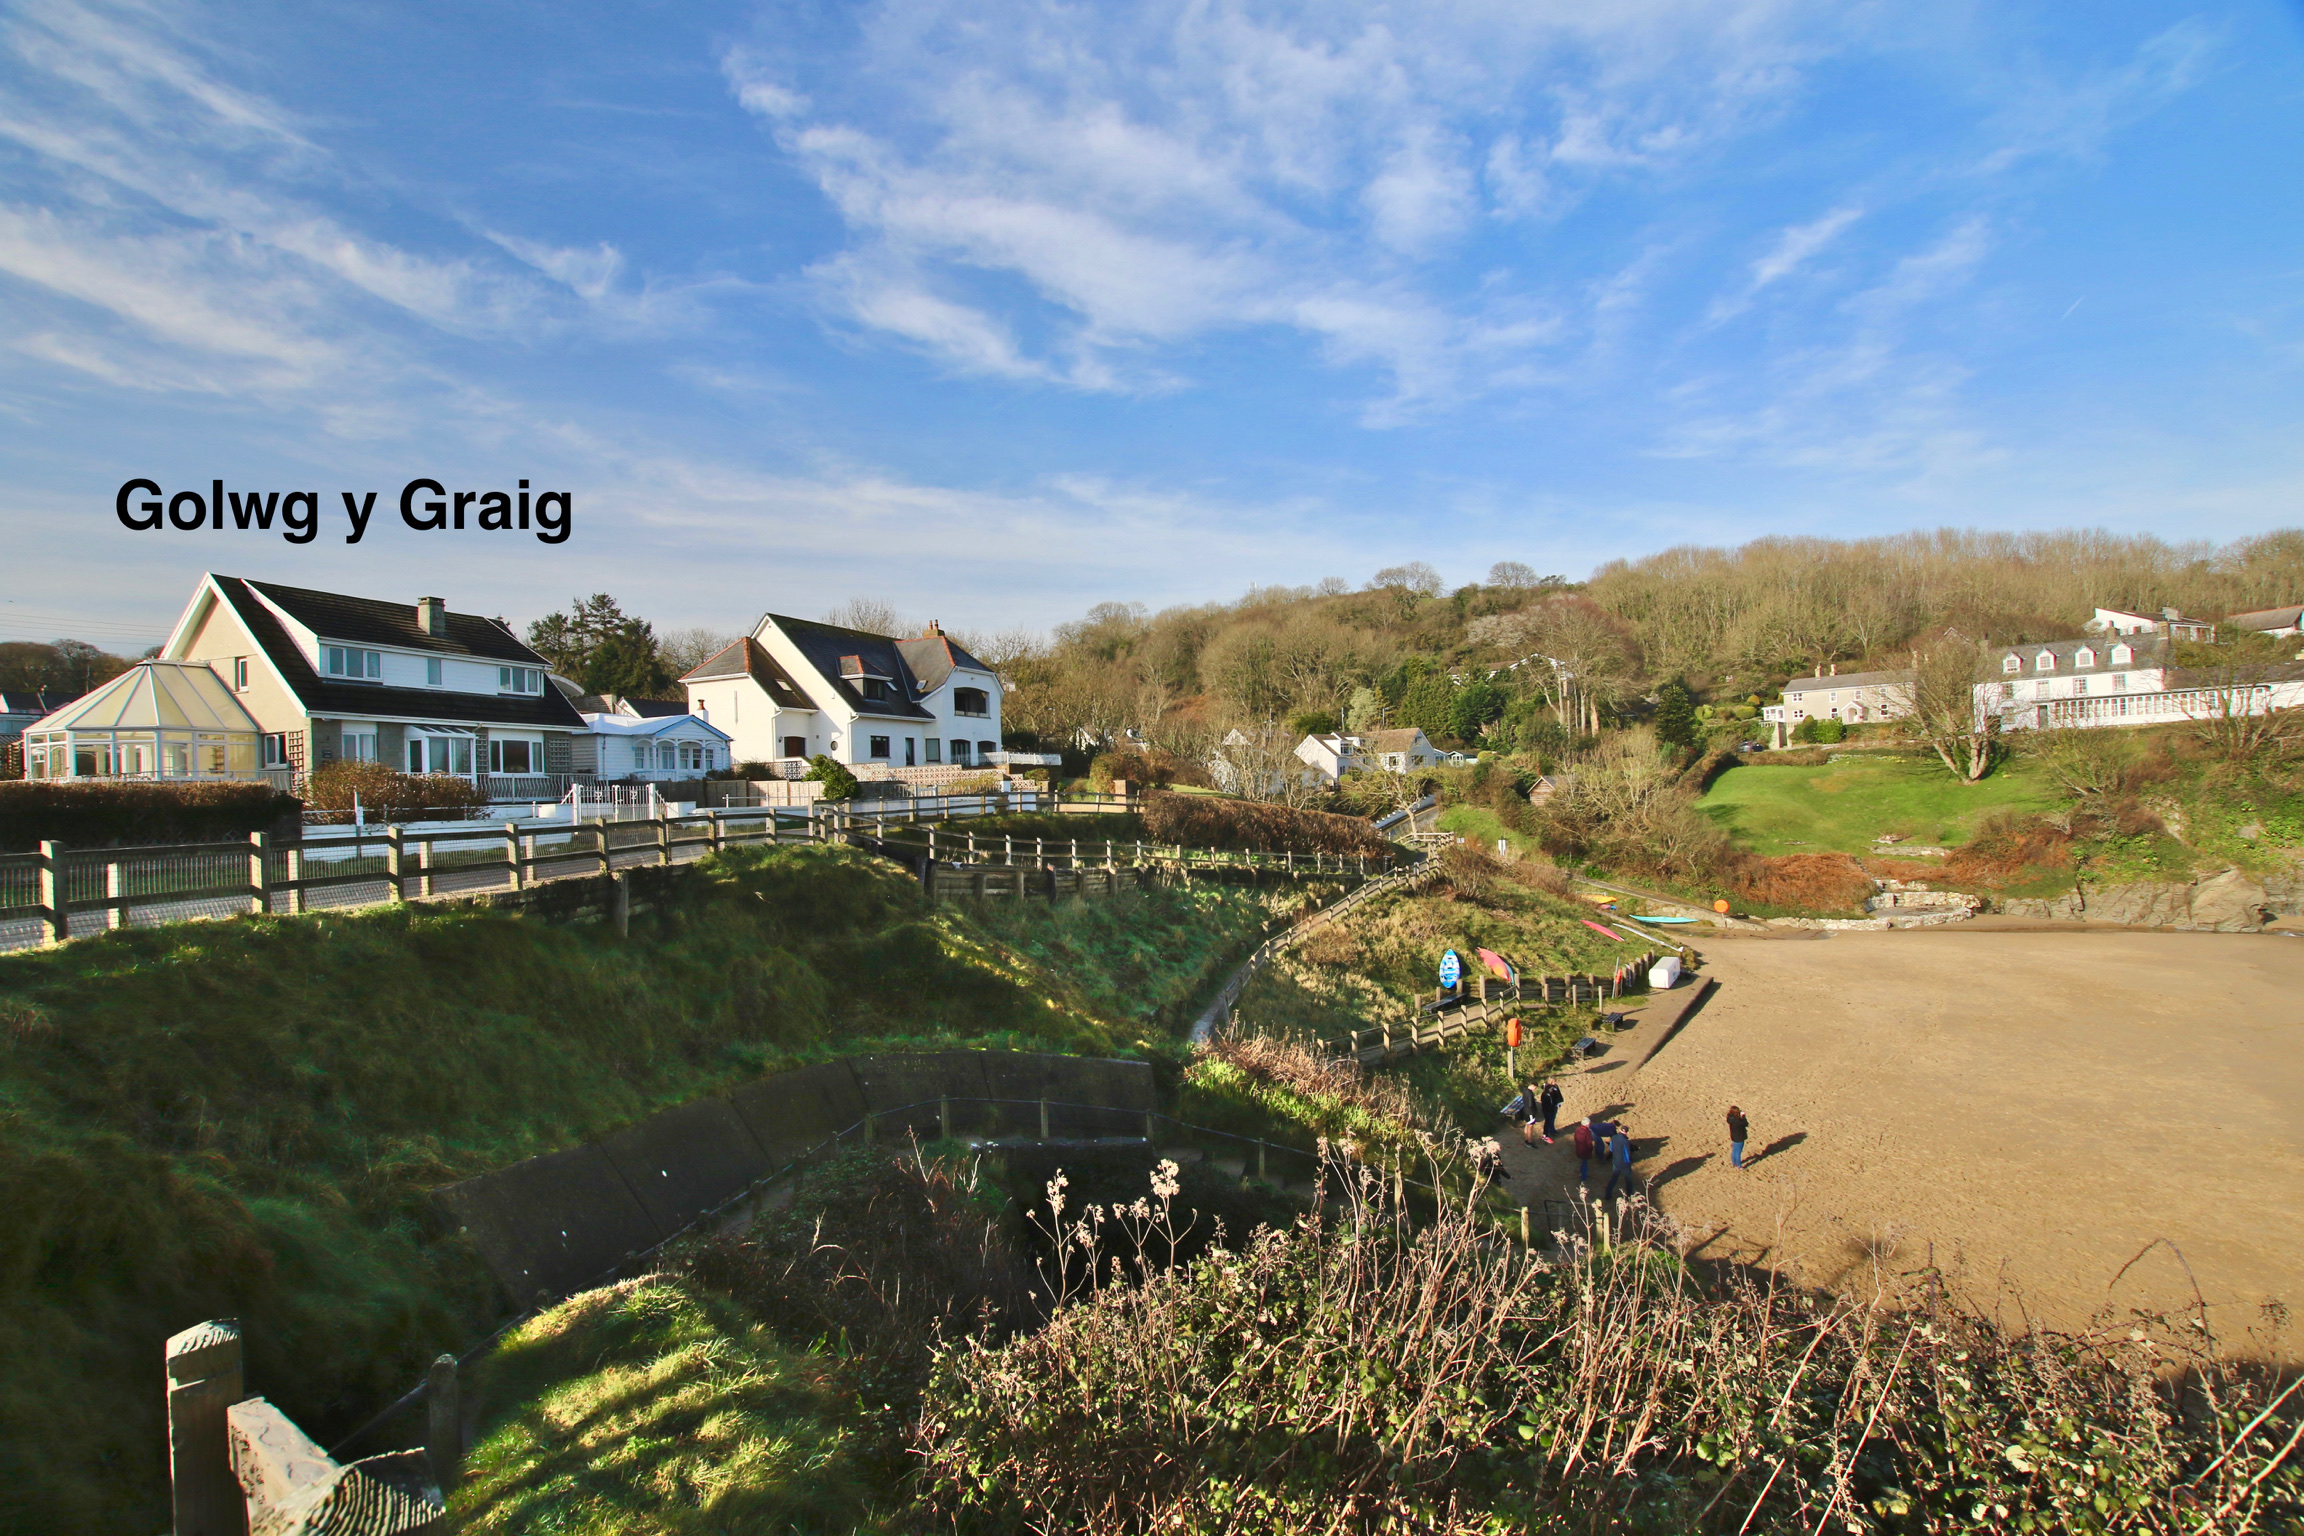 West Wales cottage overlooks Aberporth's Dolwen beach